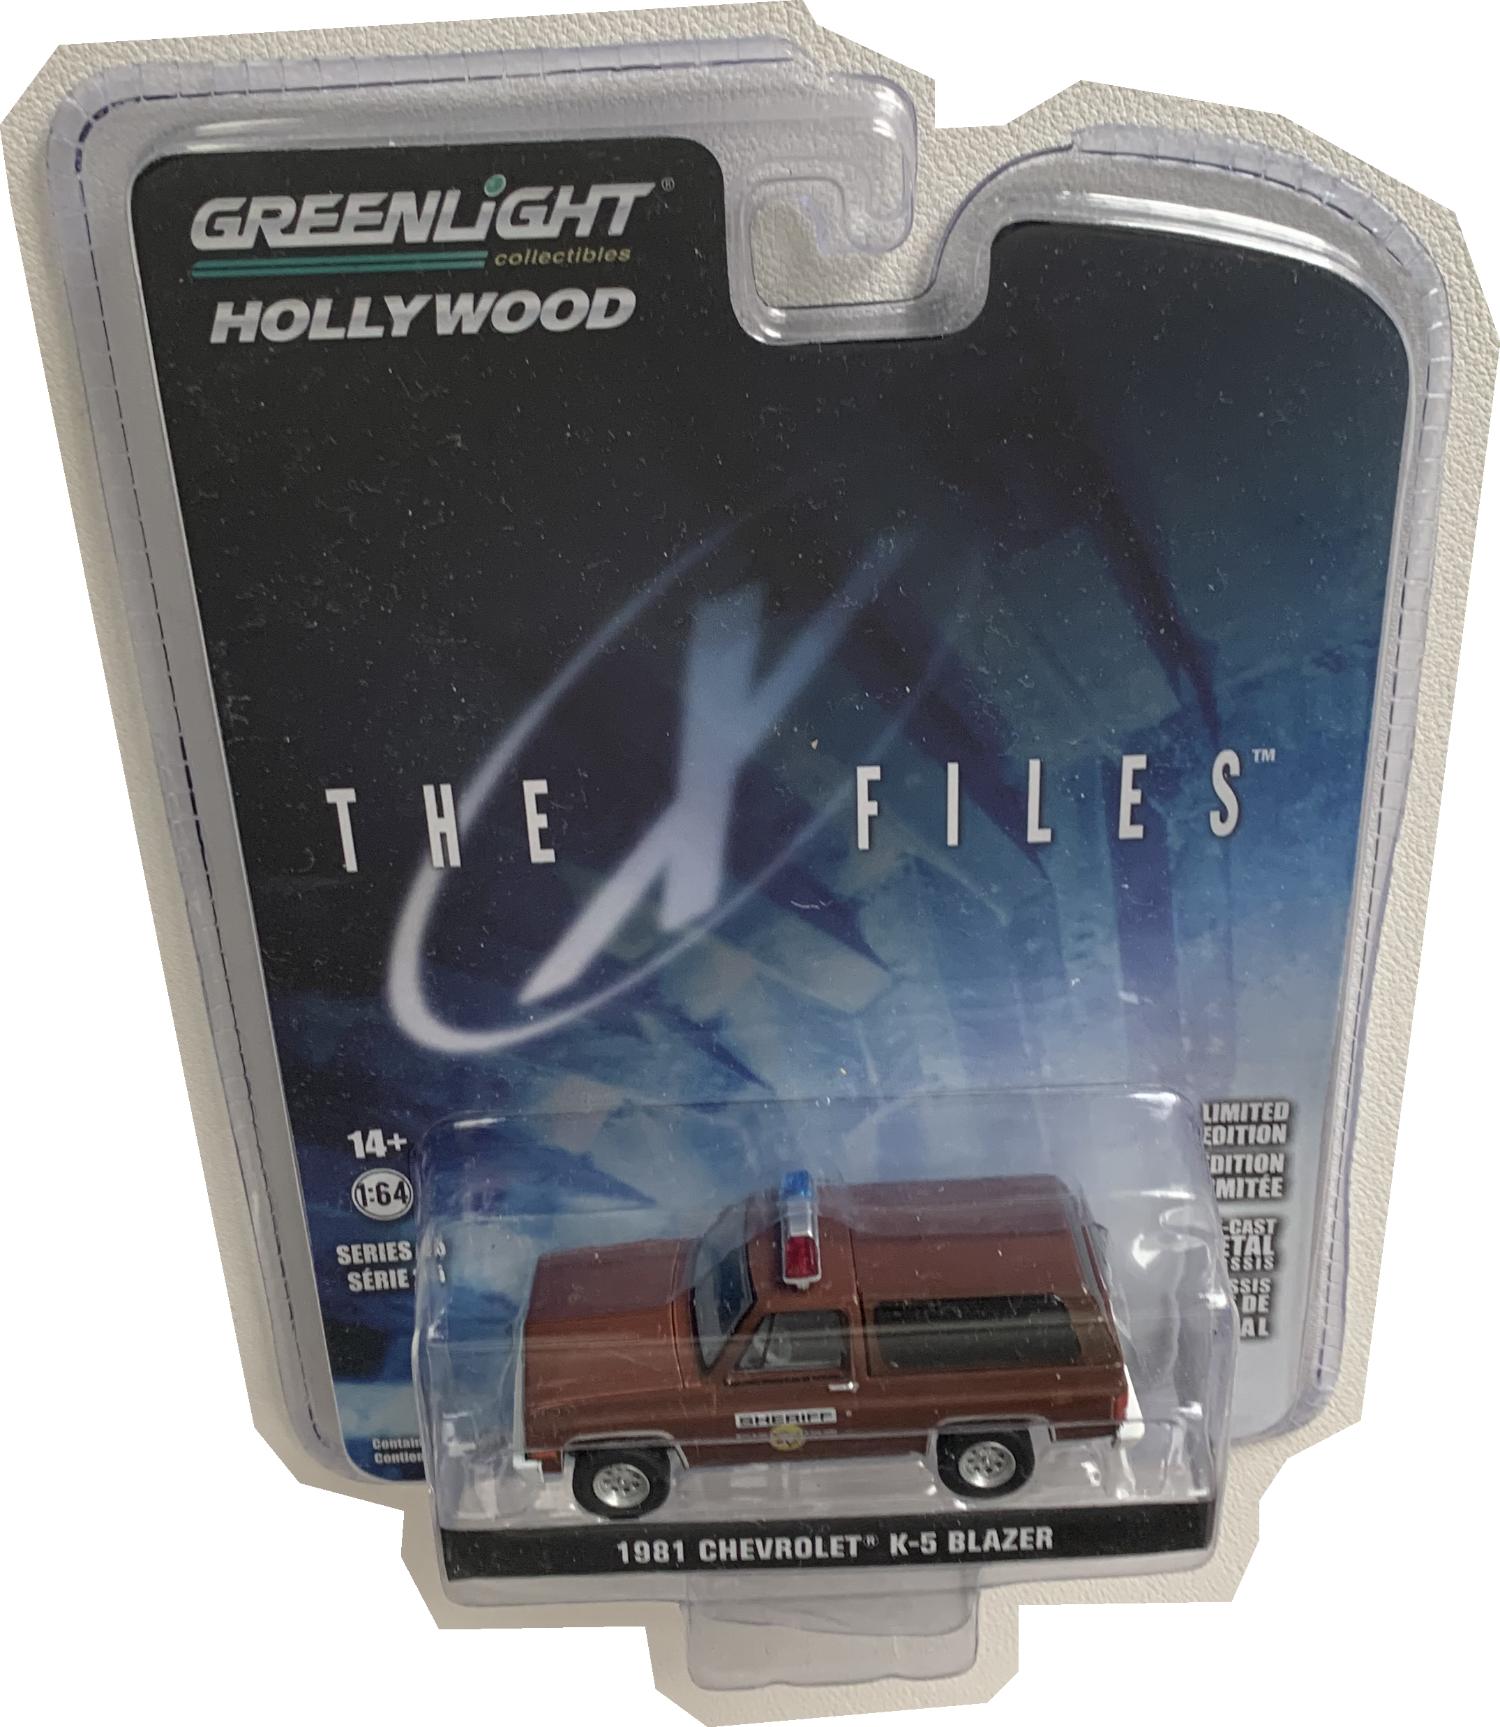 The X Files 1981 Chevrolet K-5 Blazer in brown 1:64 scale model from Greenlight, limited edition model